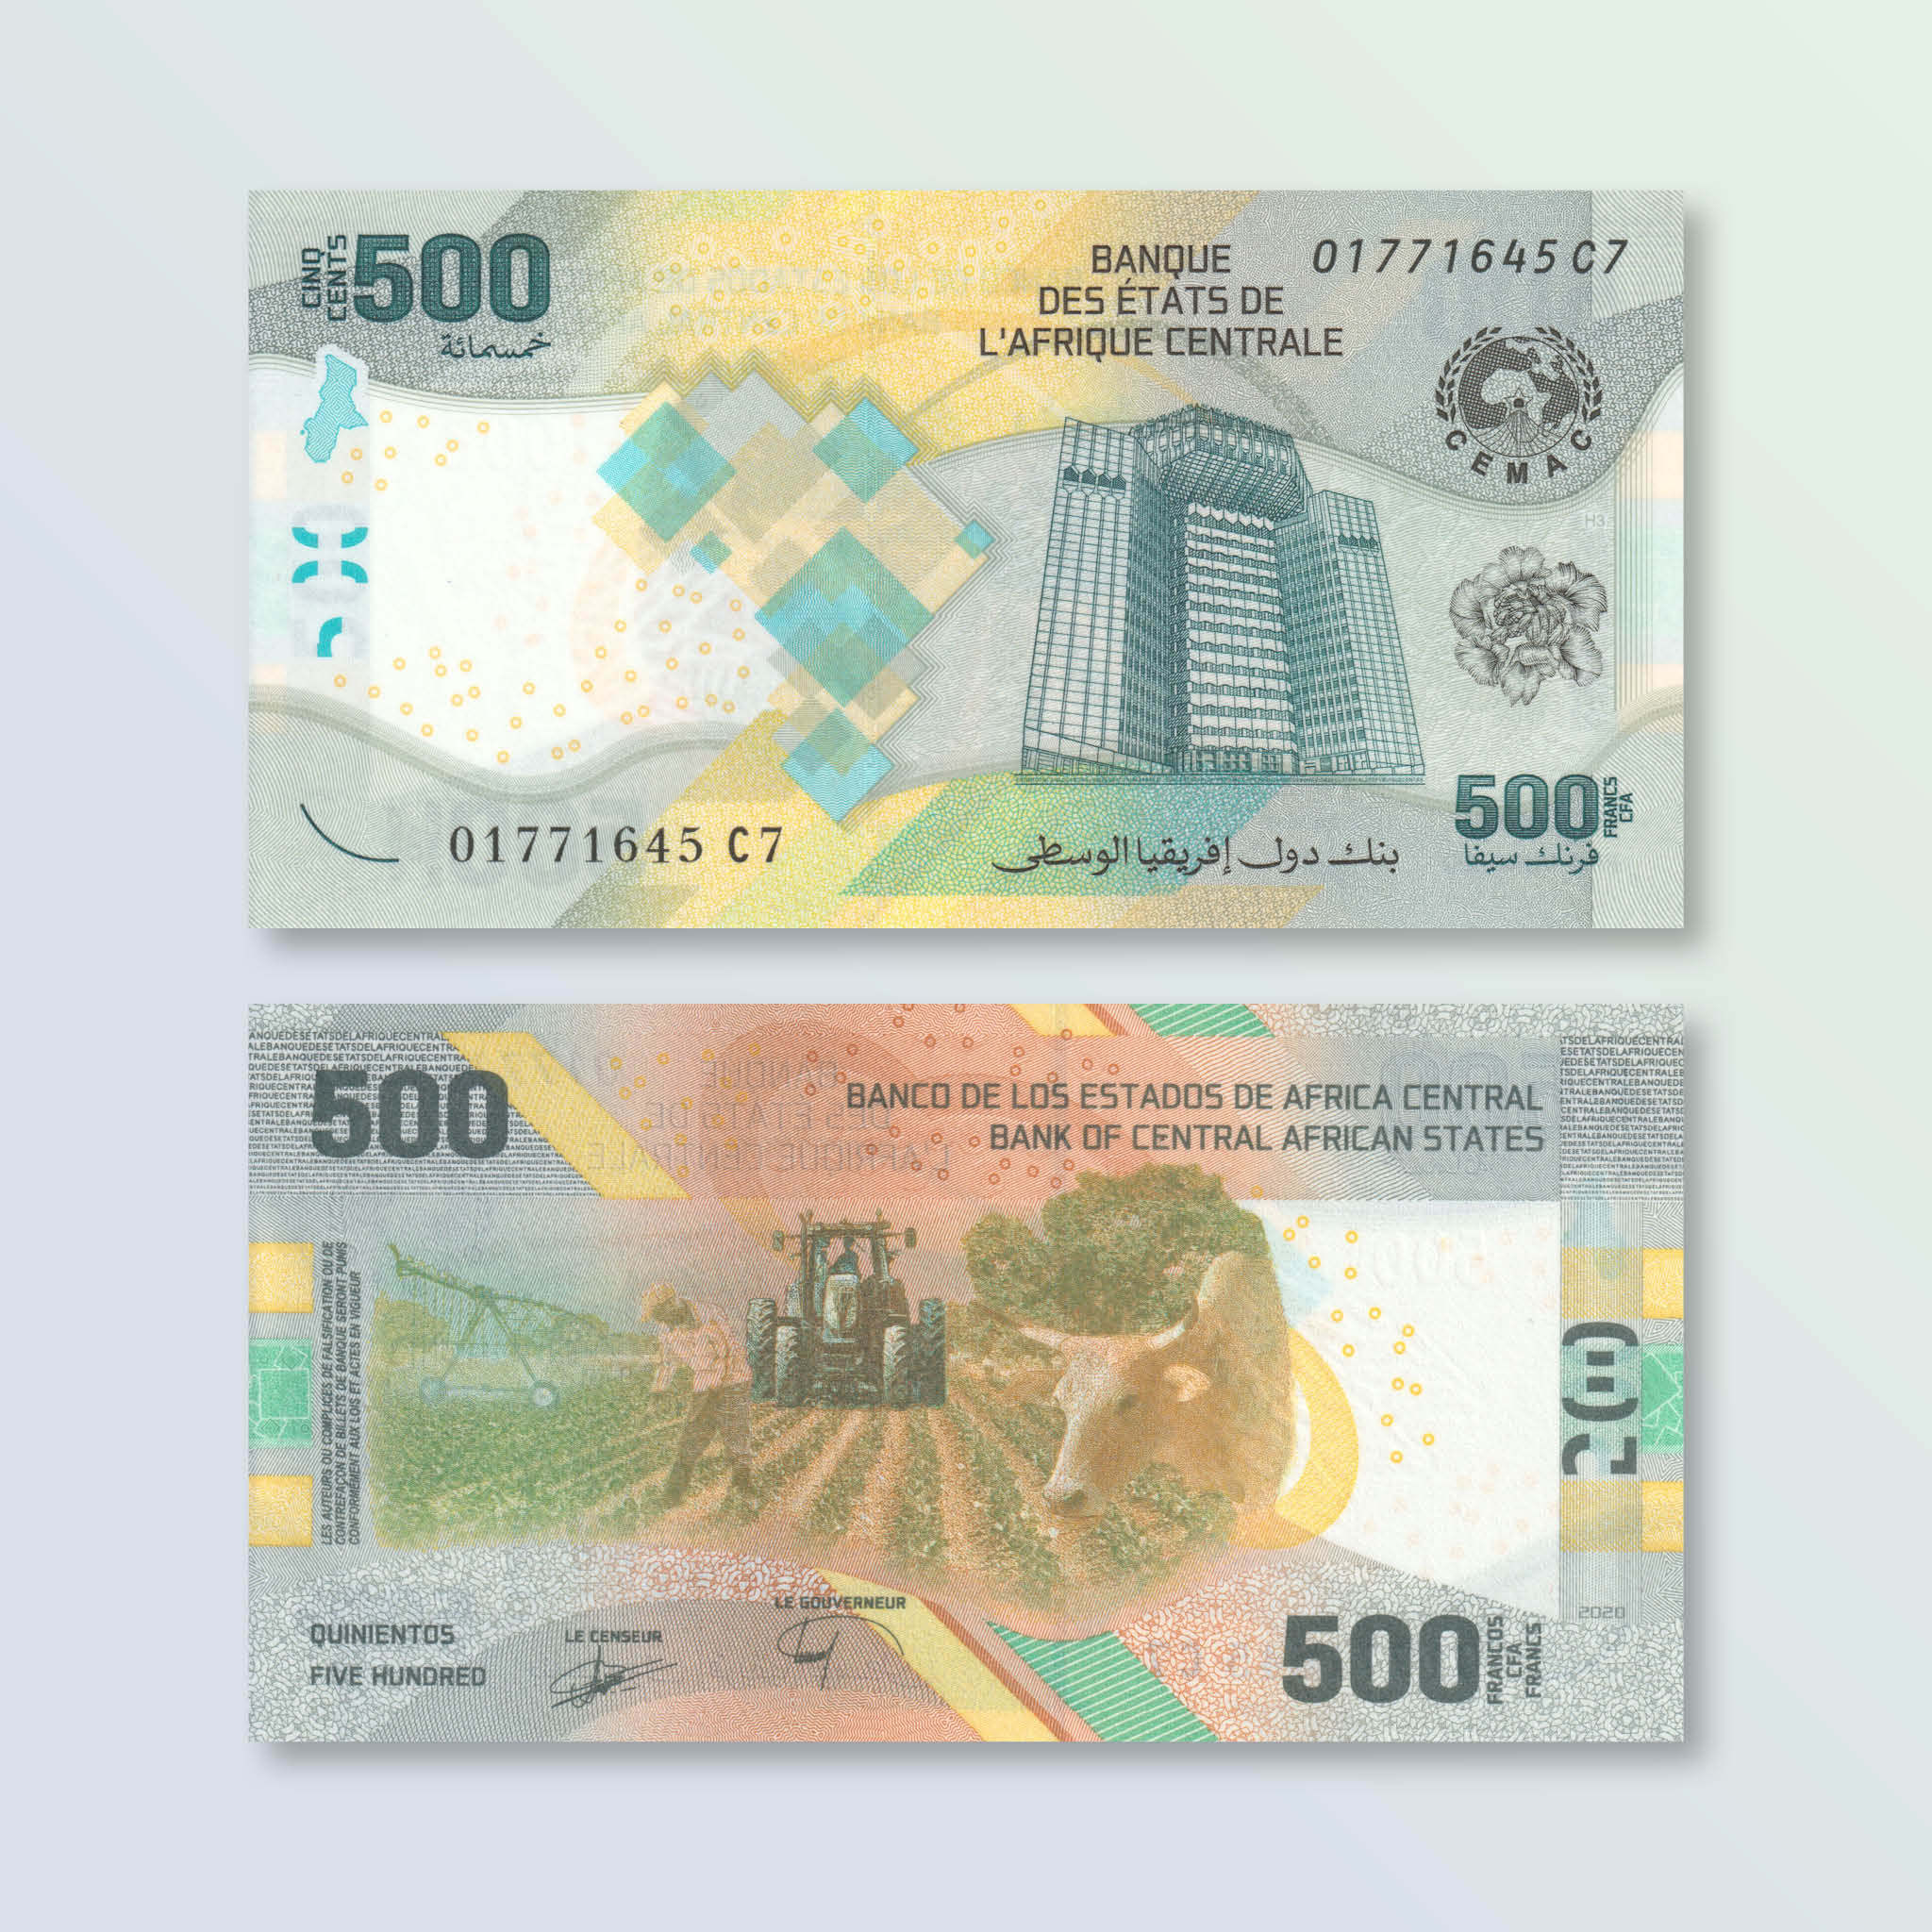 Central African States 500 Francs, 2020 (2022), B111a, UNC - Robert's World Money - World Banknotes